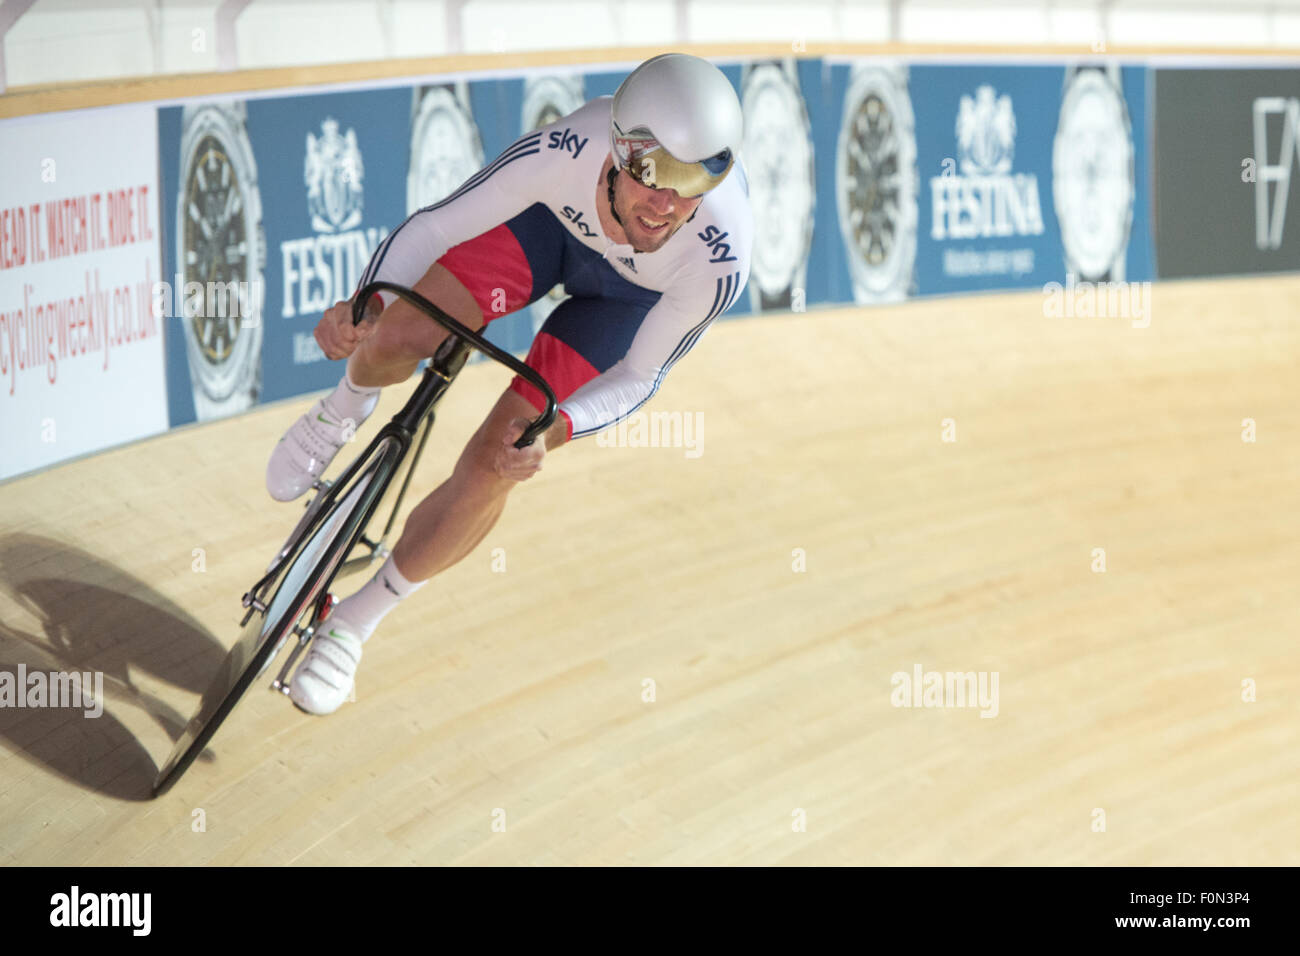 Mark Cavendish competes in the flying lap at the Revolution Series at Derby Arena, Derby, United Kingdom on 16 August 2015. Stock Photo